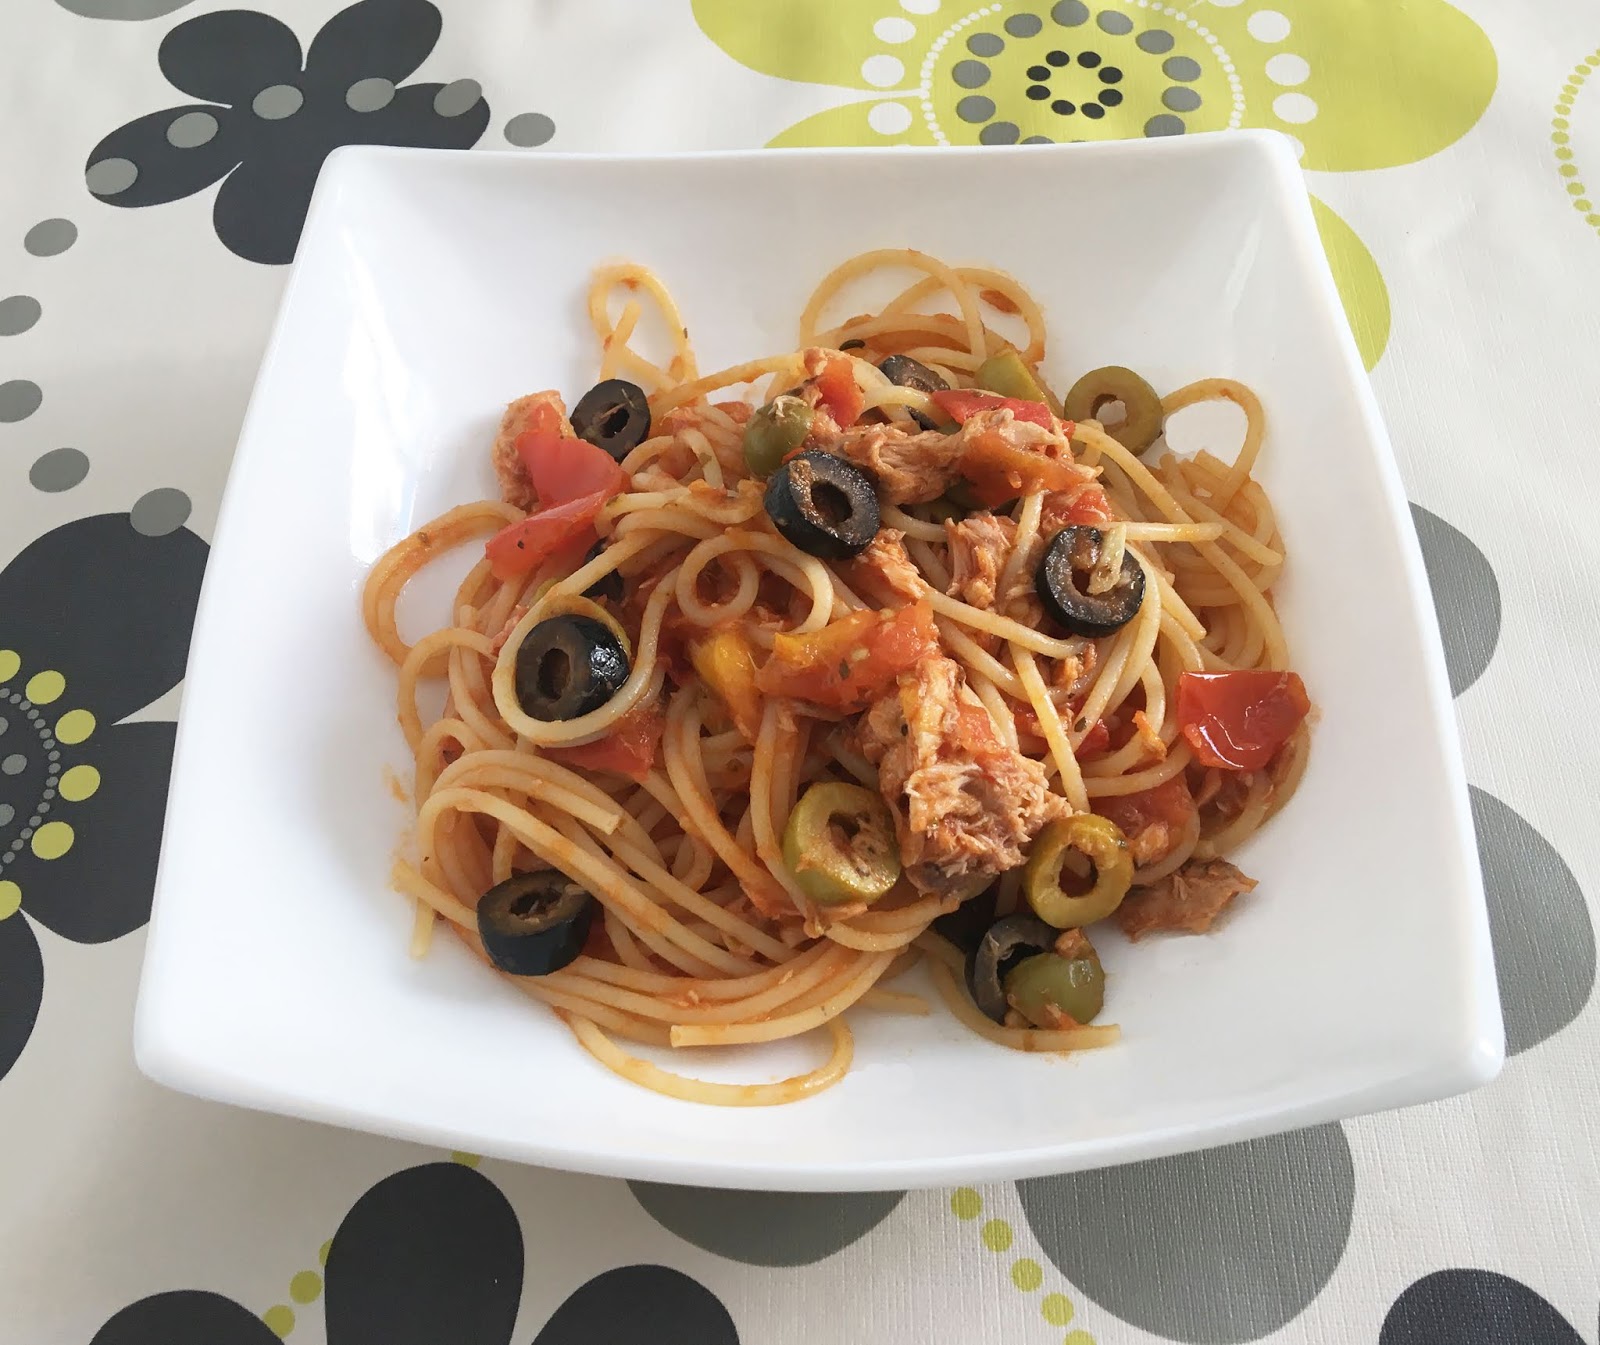 Recipes for first cooks: Spaghetti with tuna